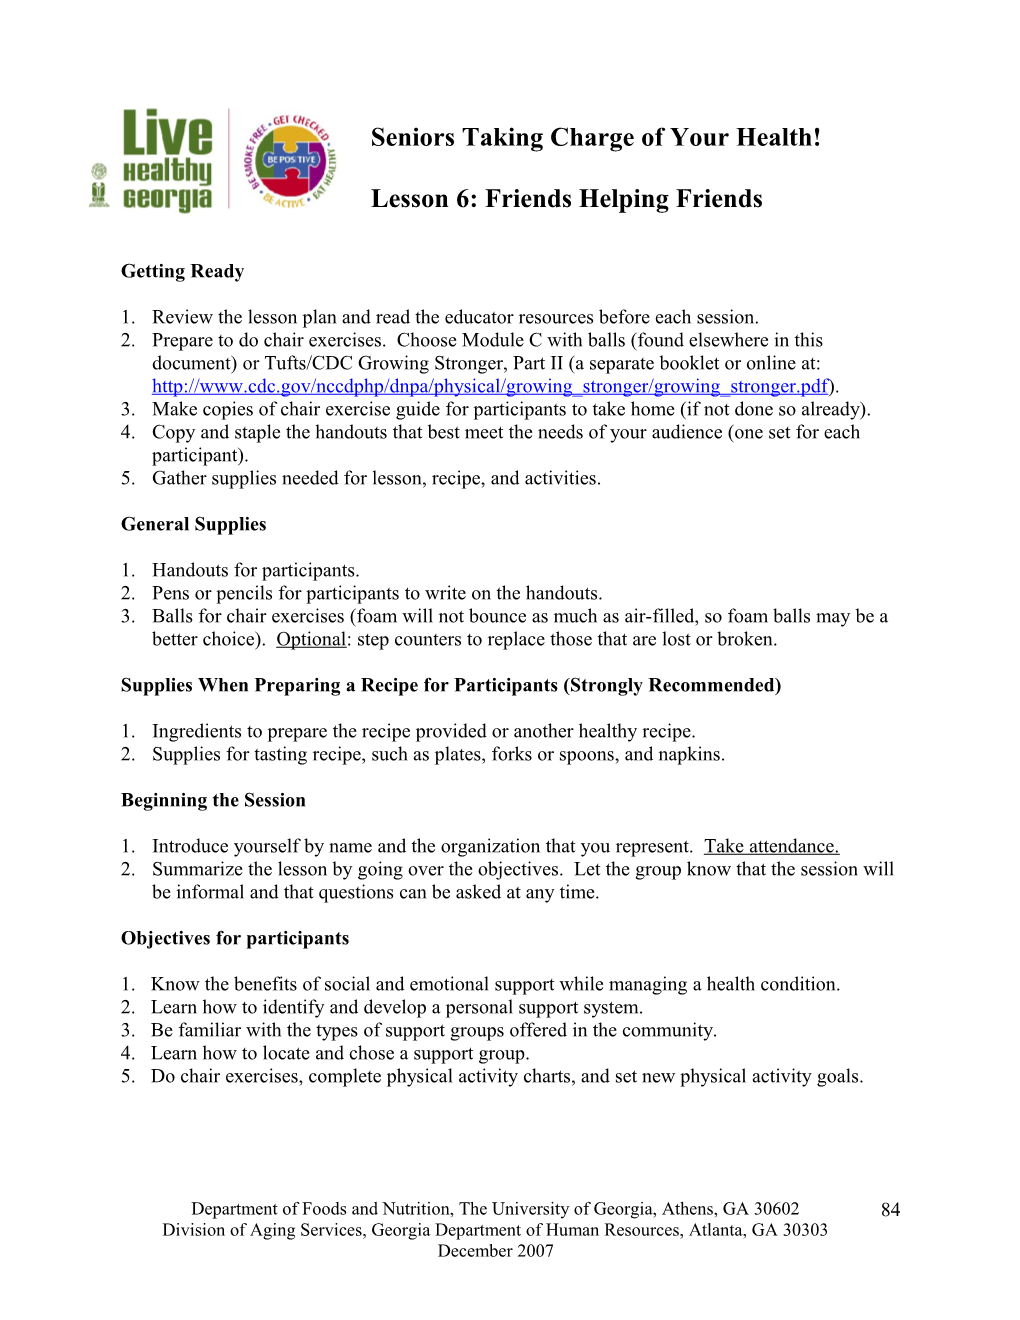 Lesson 6: Friends Helping Friends